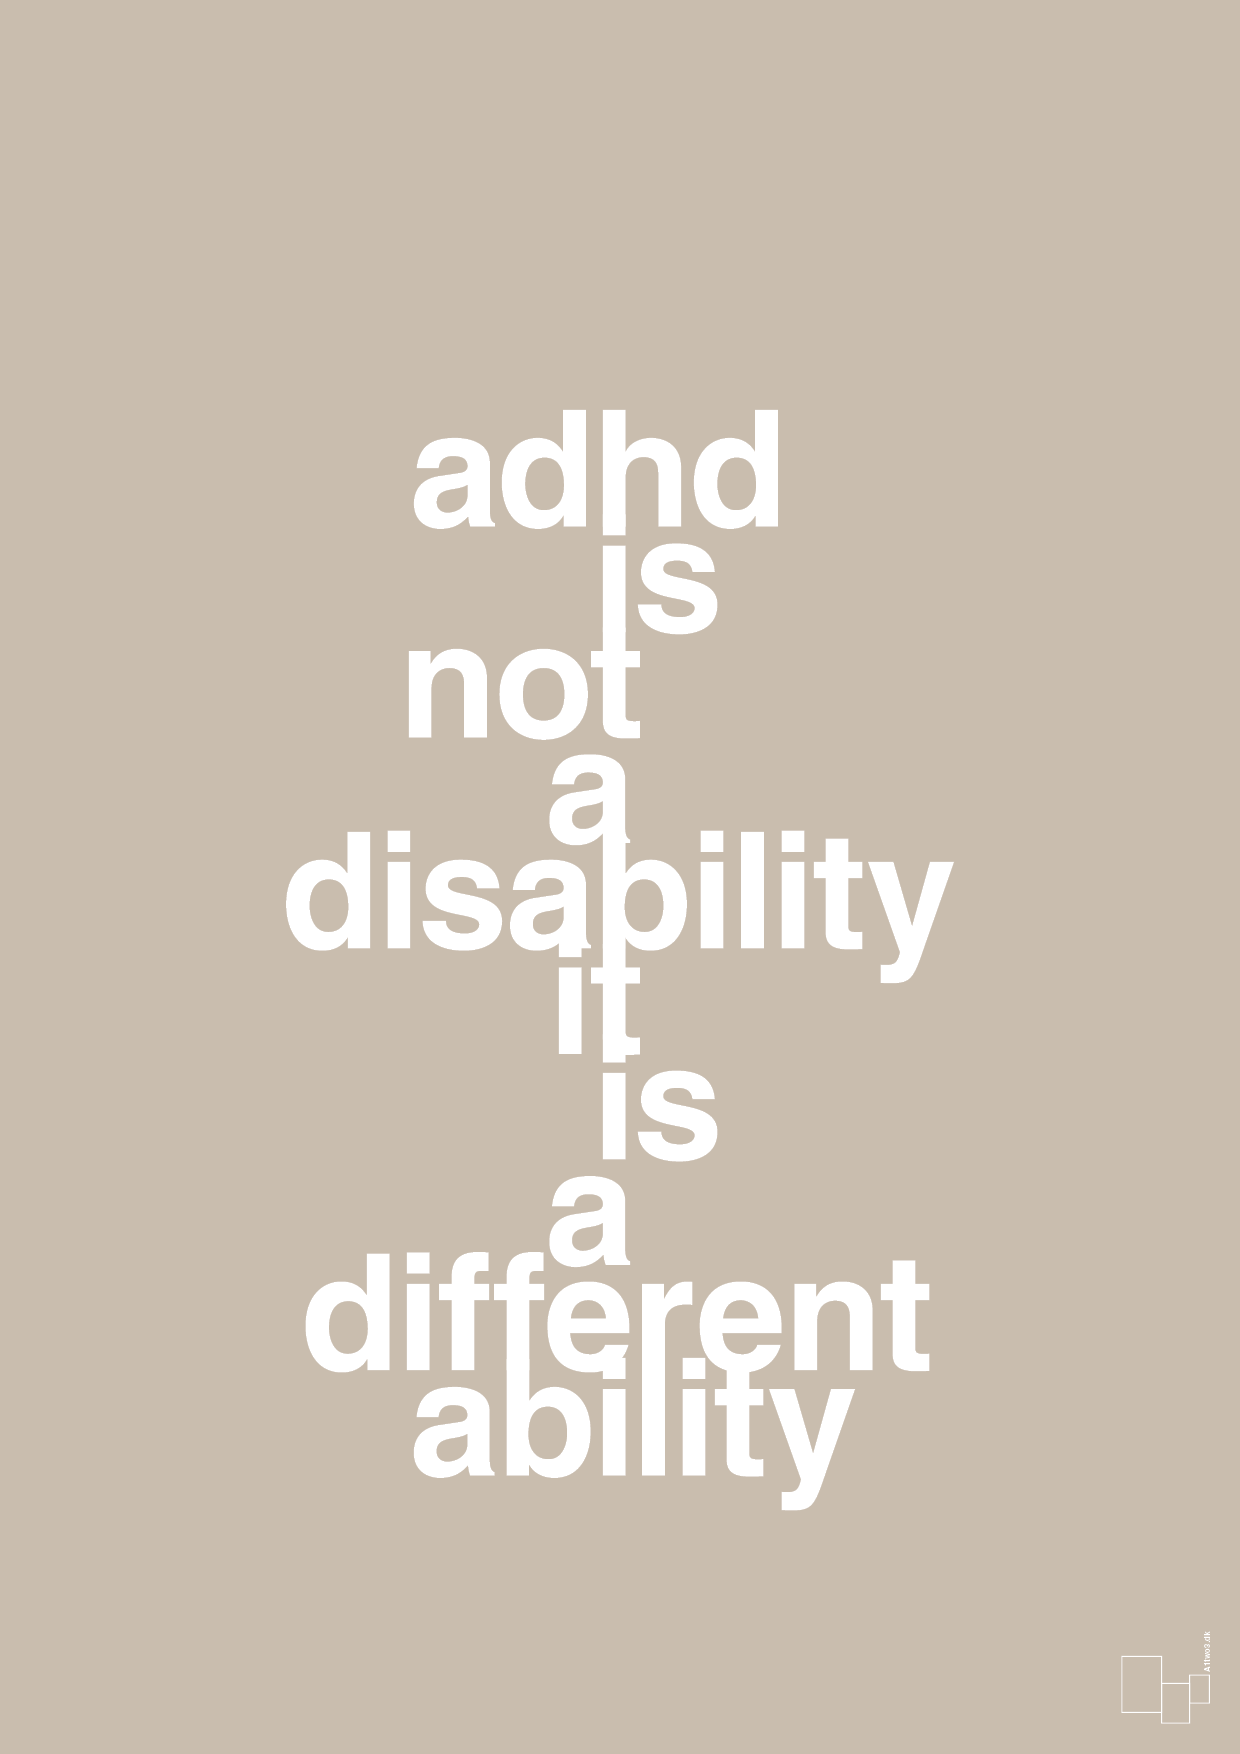 adhd is not a disability it is a different ability - Plakat med Samfund i Creamy Mushroom